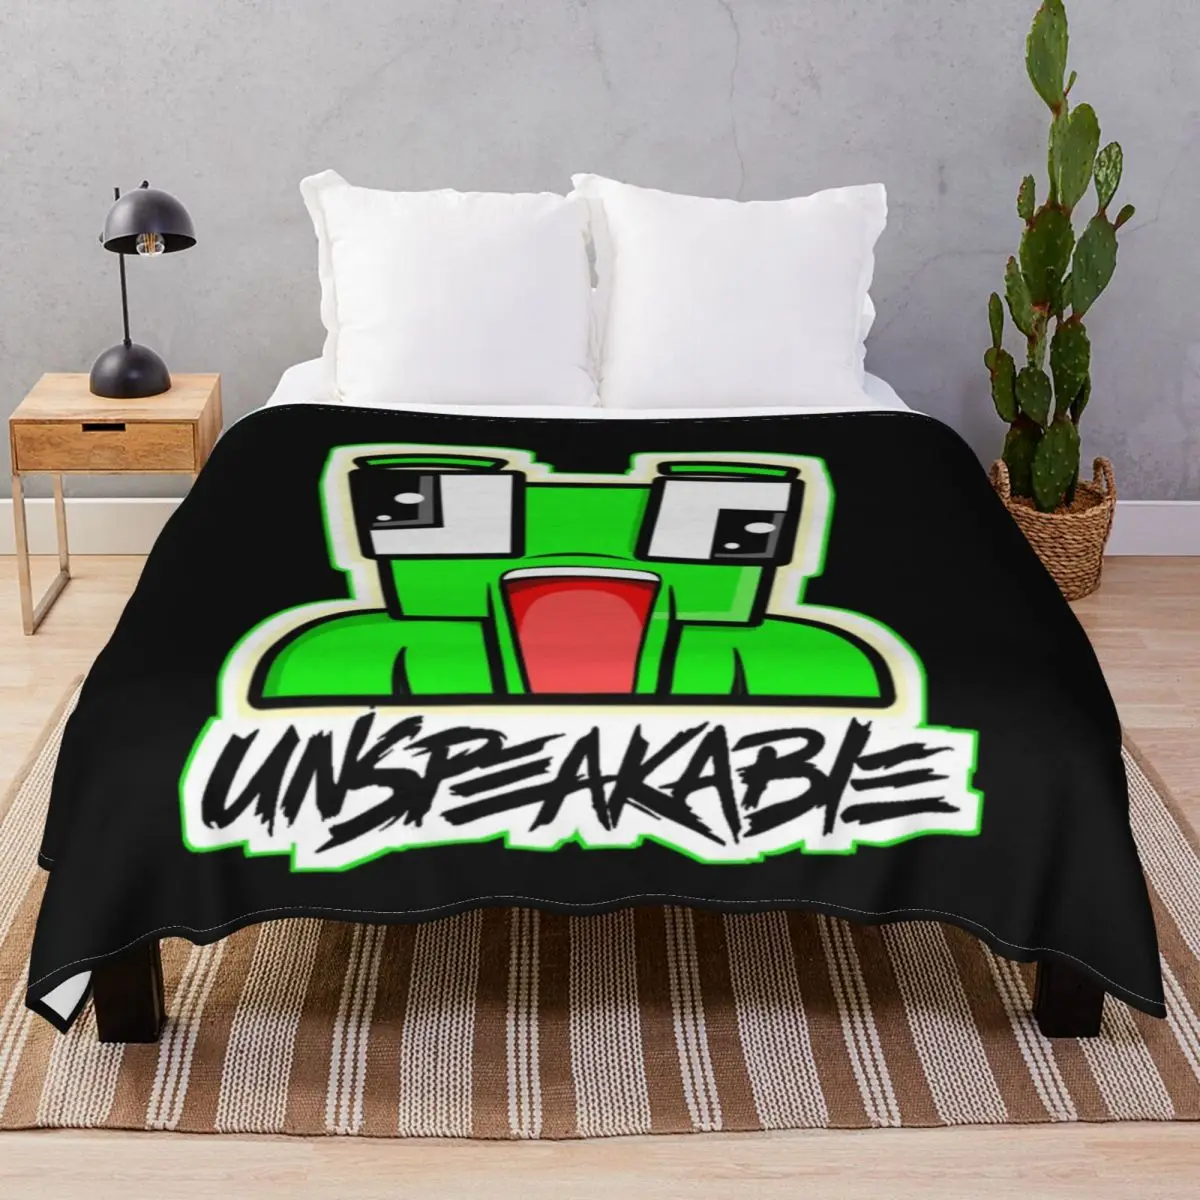 Unspeak.able Perfect Blankets Flannel Decoration Warm Throw Blanket for Bedding Sofa Camp Cinema